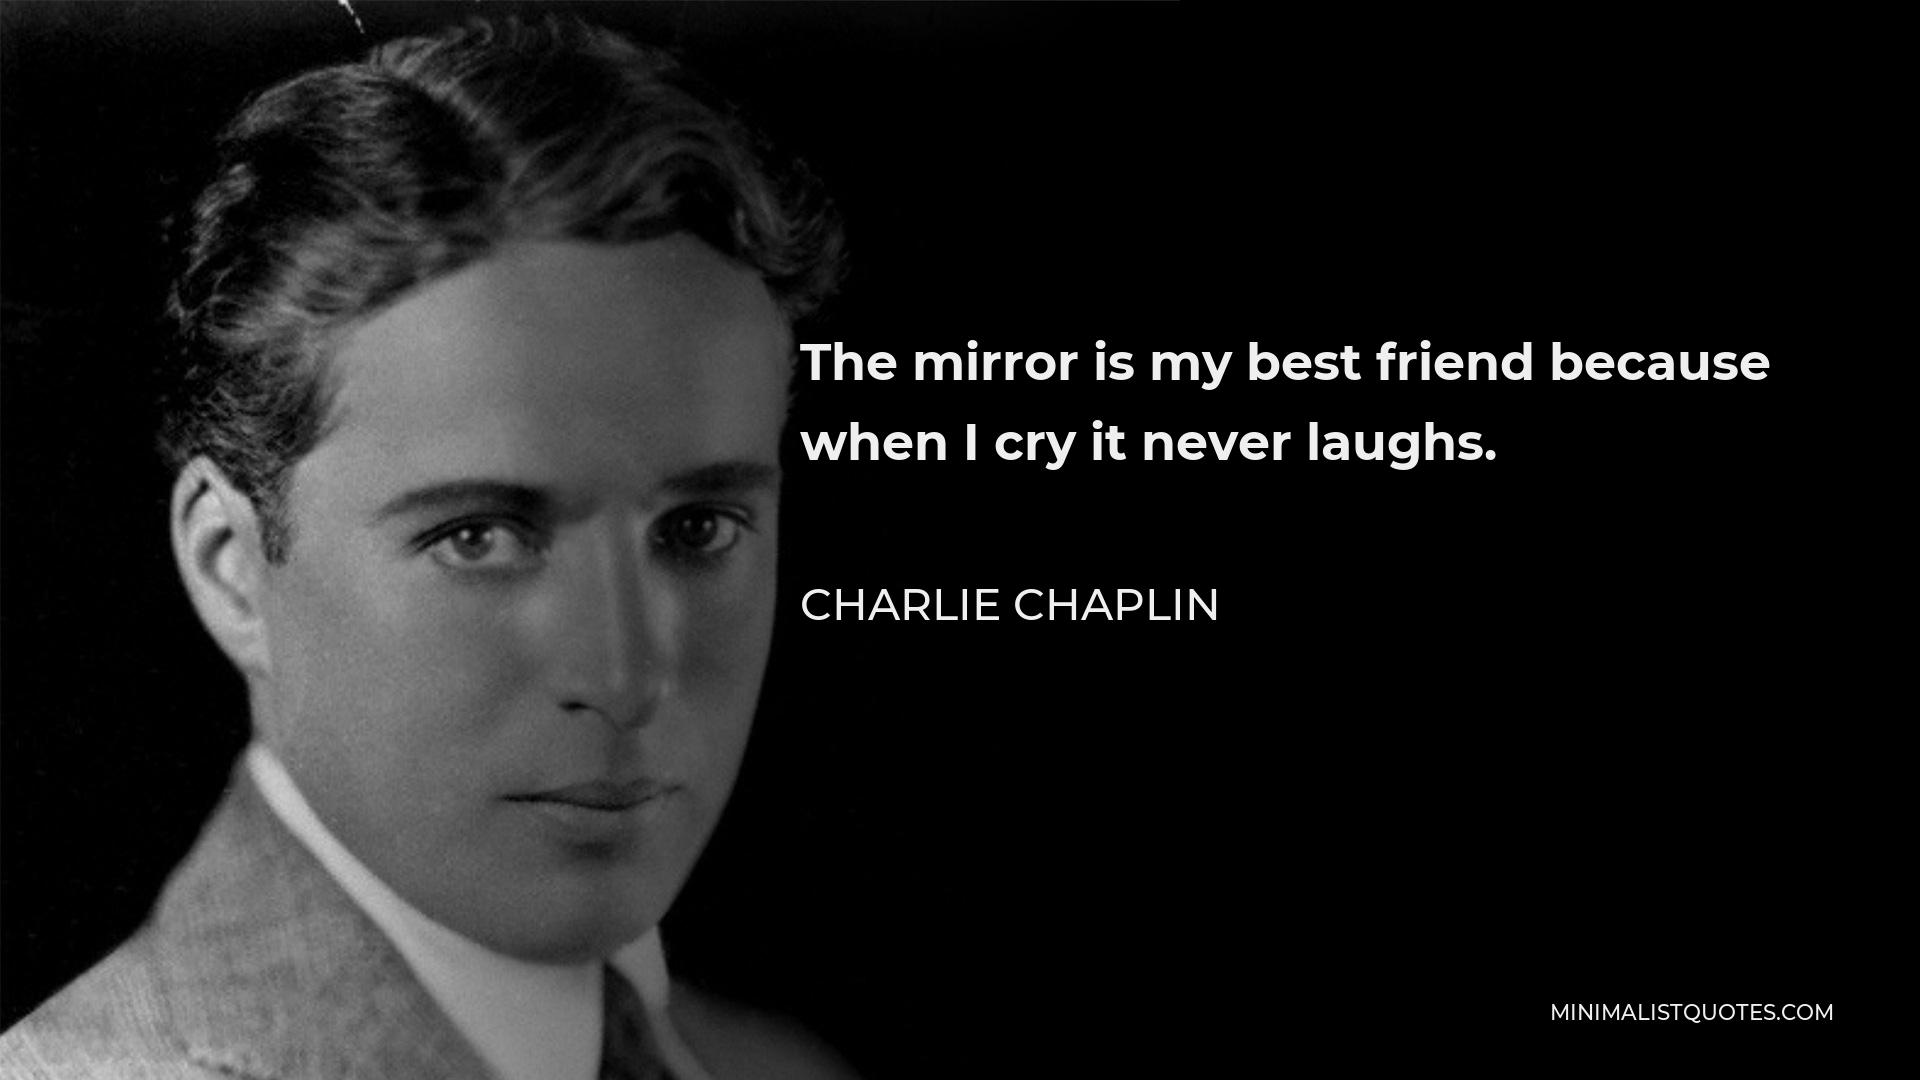 Charlie Chaplin Quote - The mirror is my best friend because when I cry it never laughs.